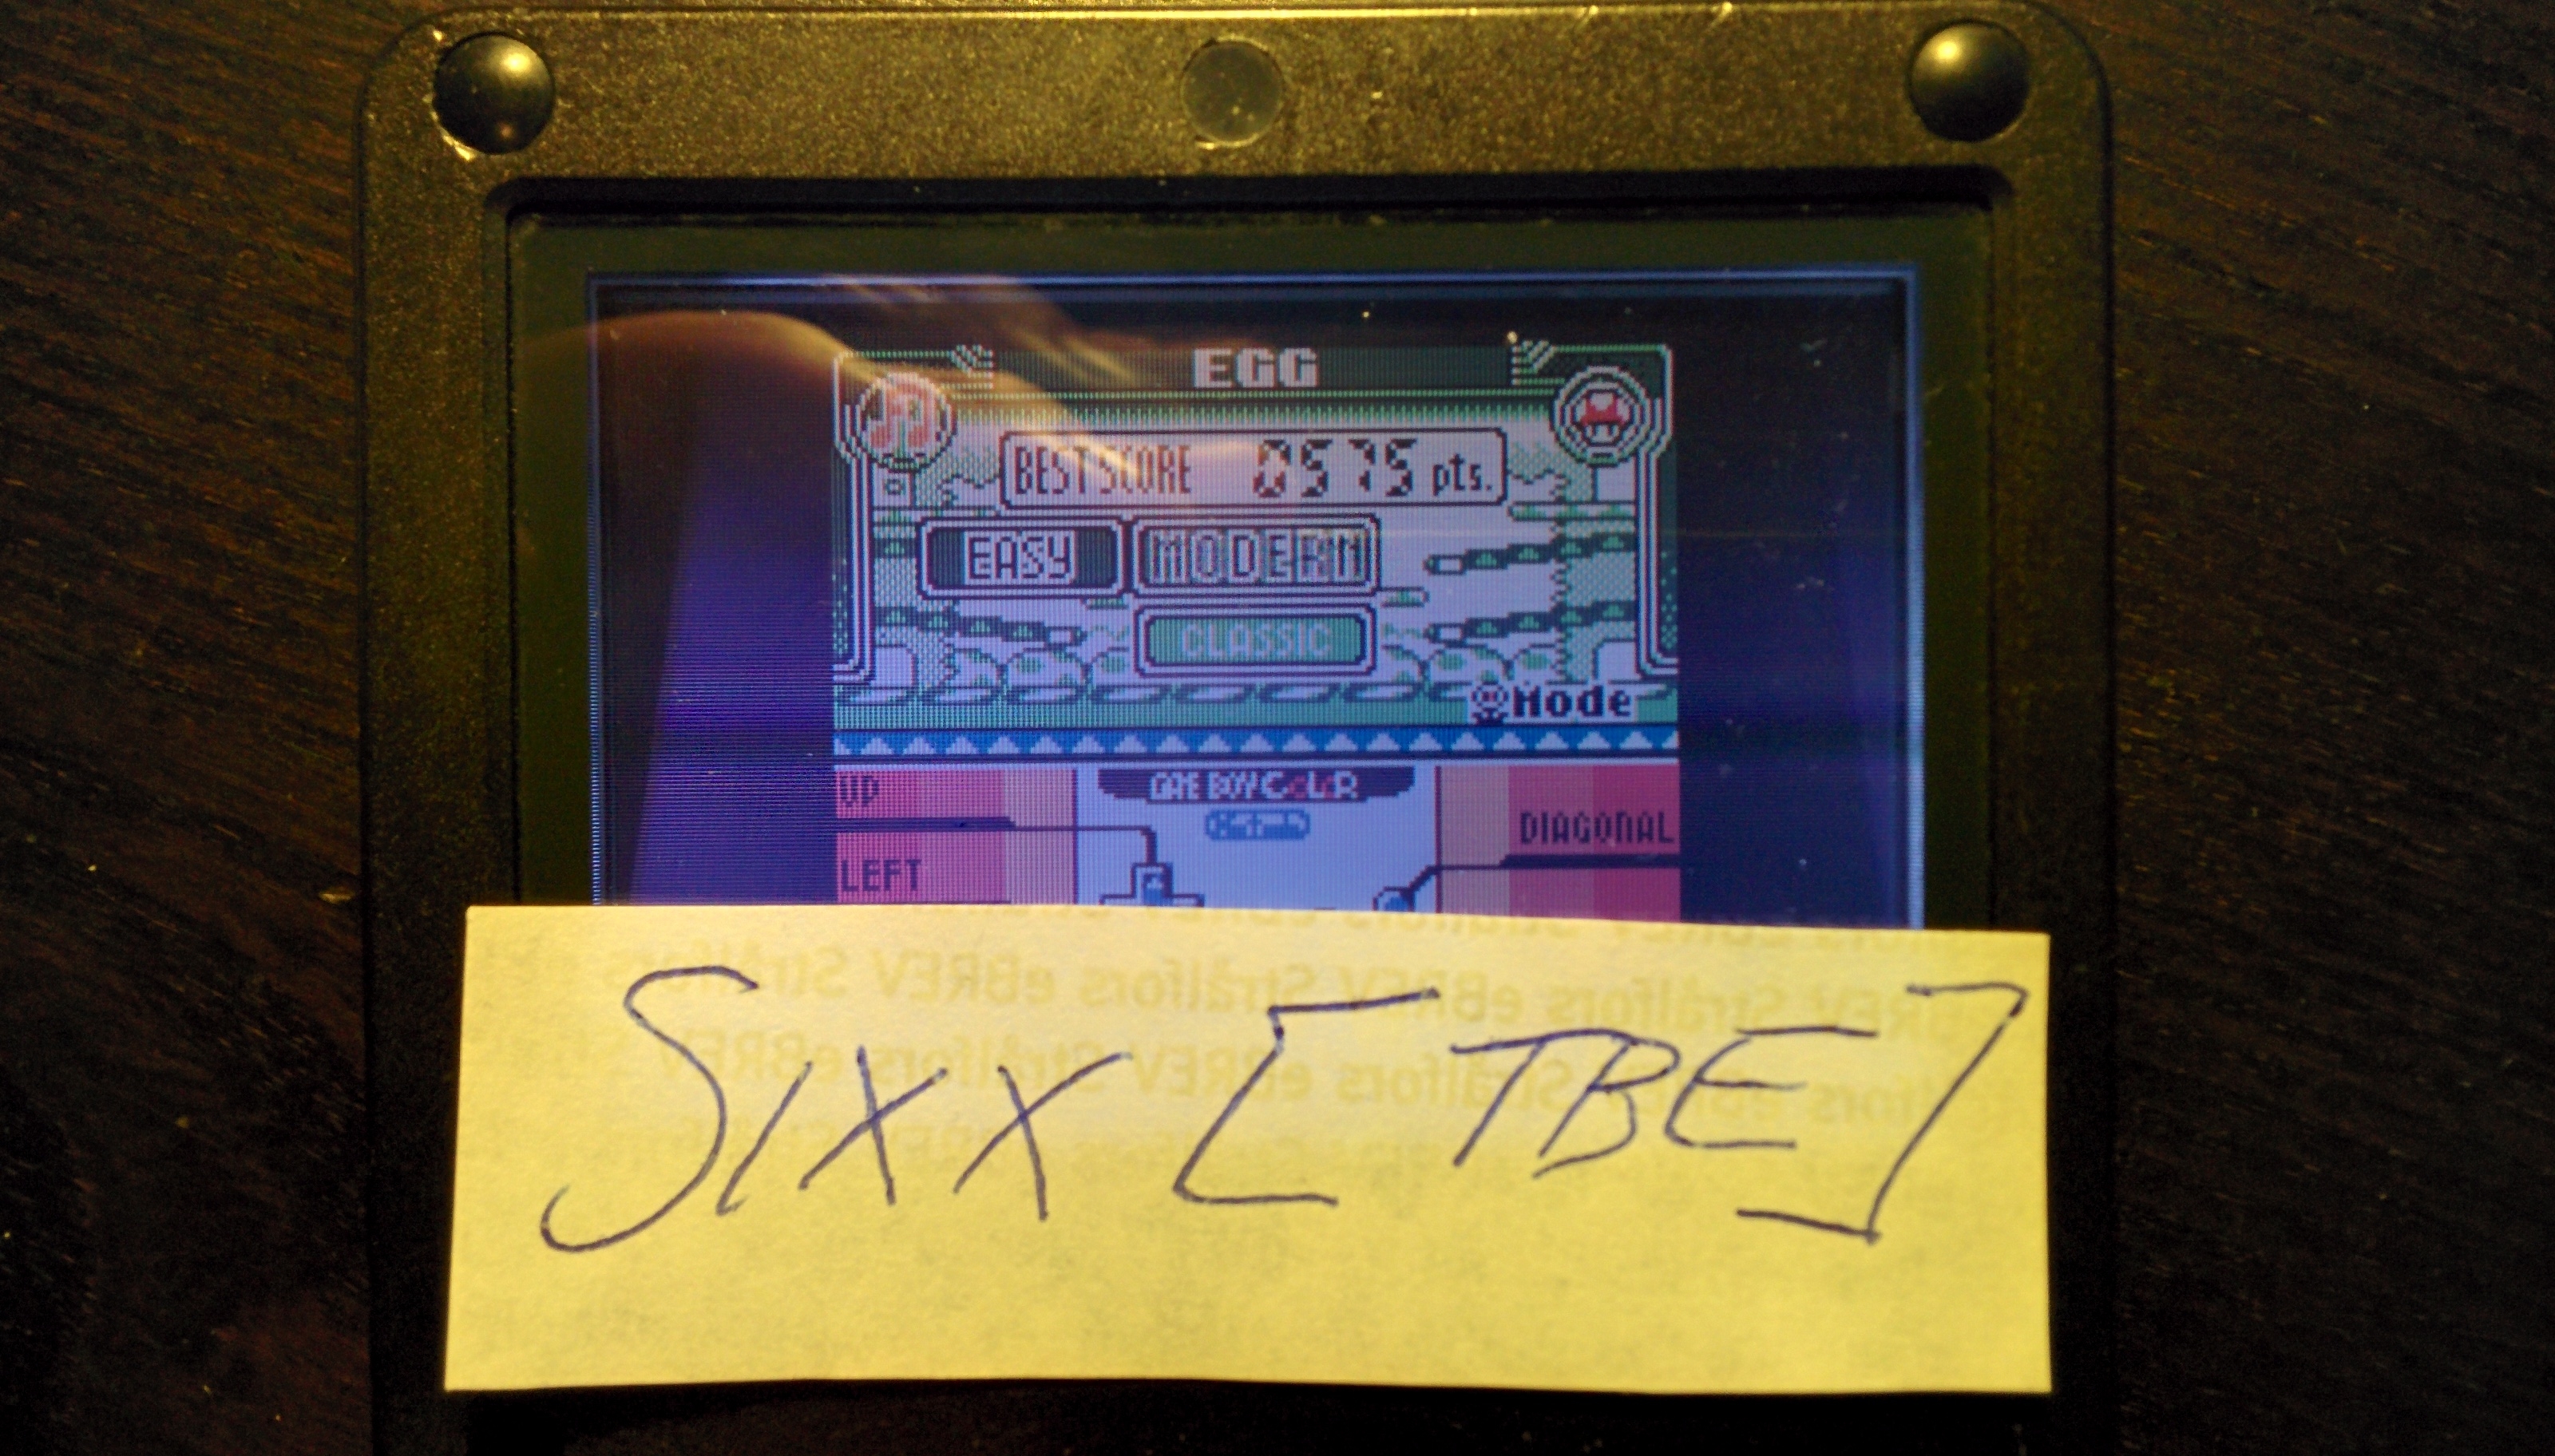 Sixx: Game & Watch Gallery 3: Egg: Modern: Easy (Game Boy Color) 575 points on 2014-09-12 13:57:20